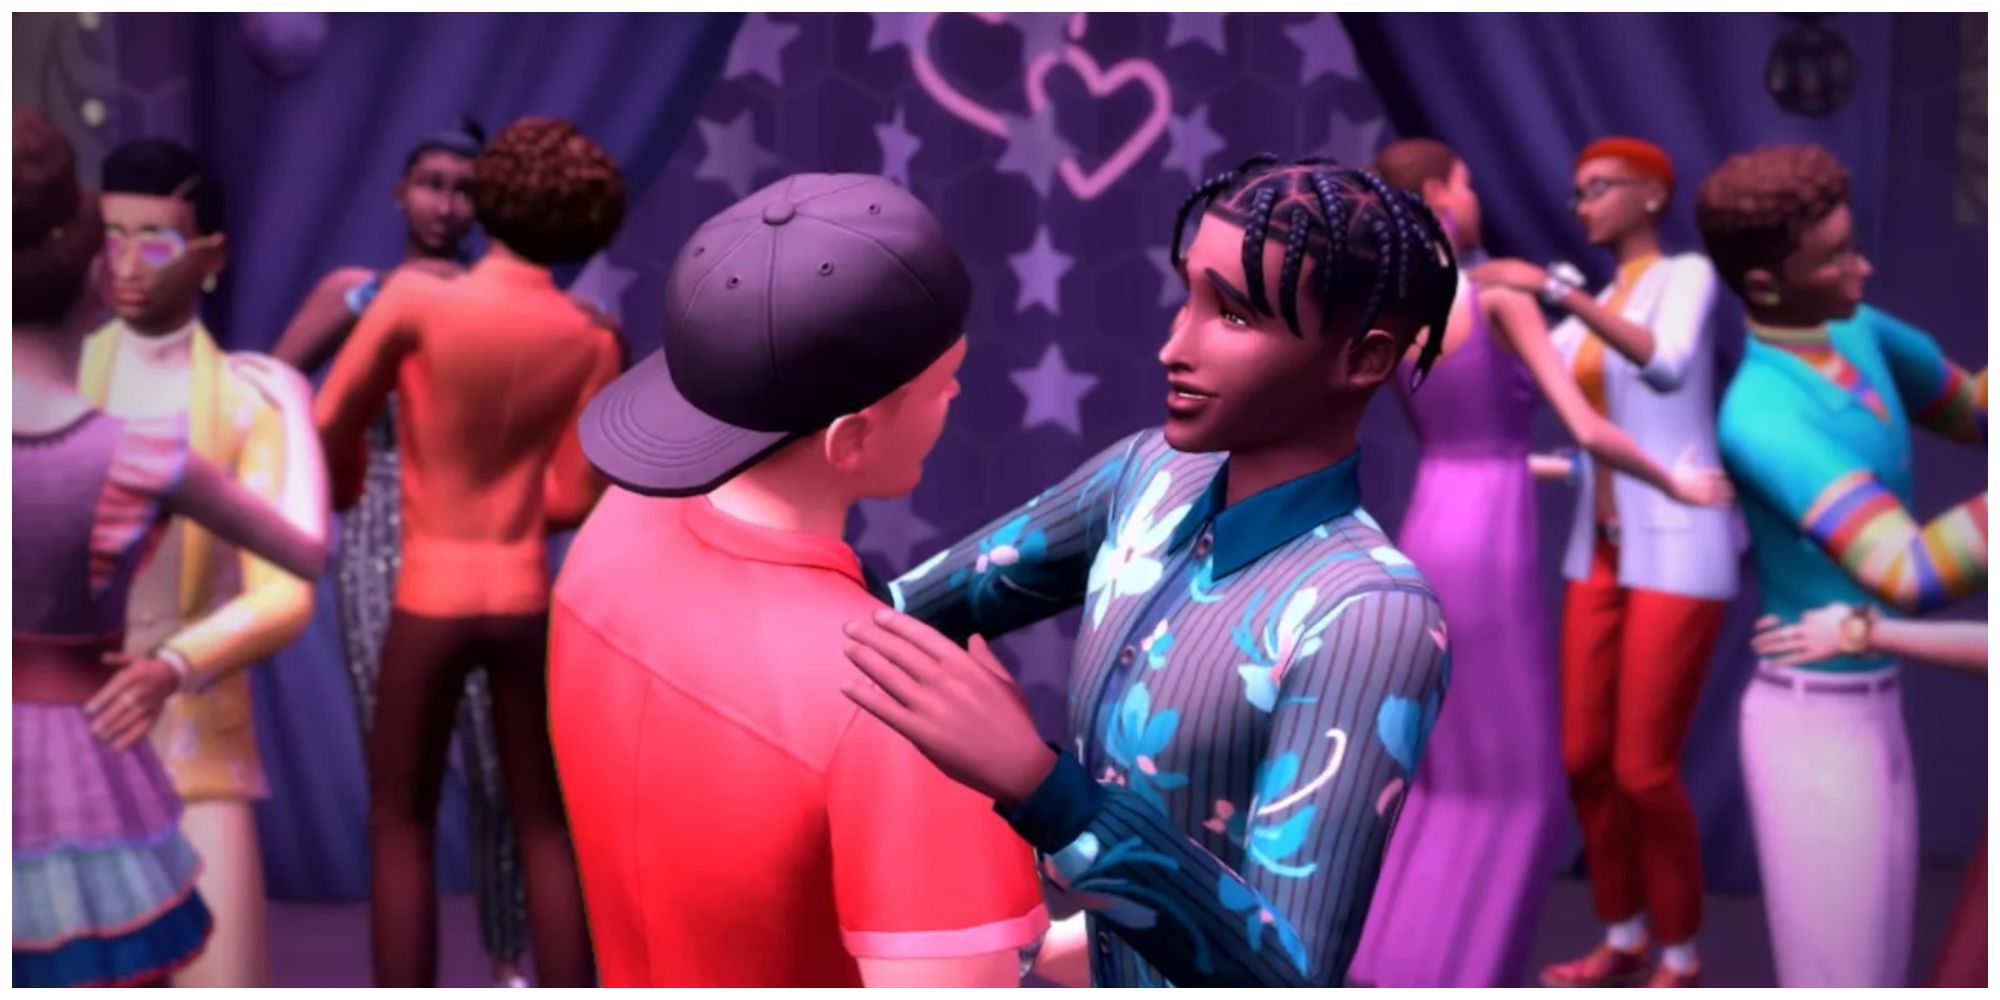 Teen Sims Dancing at Prom in The Sims 4